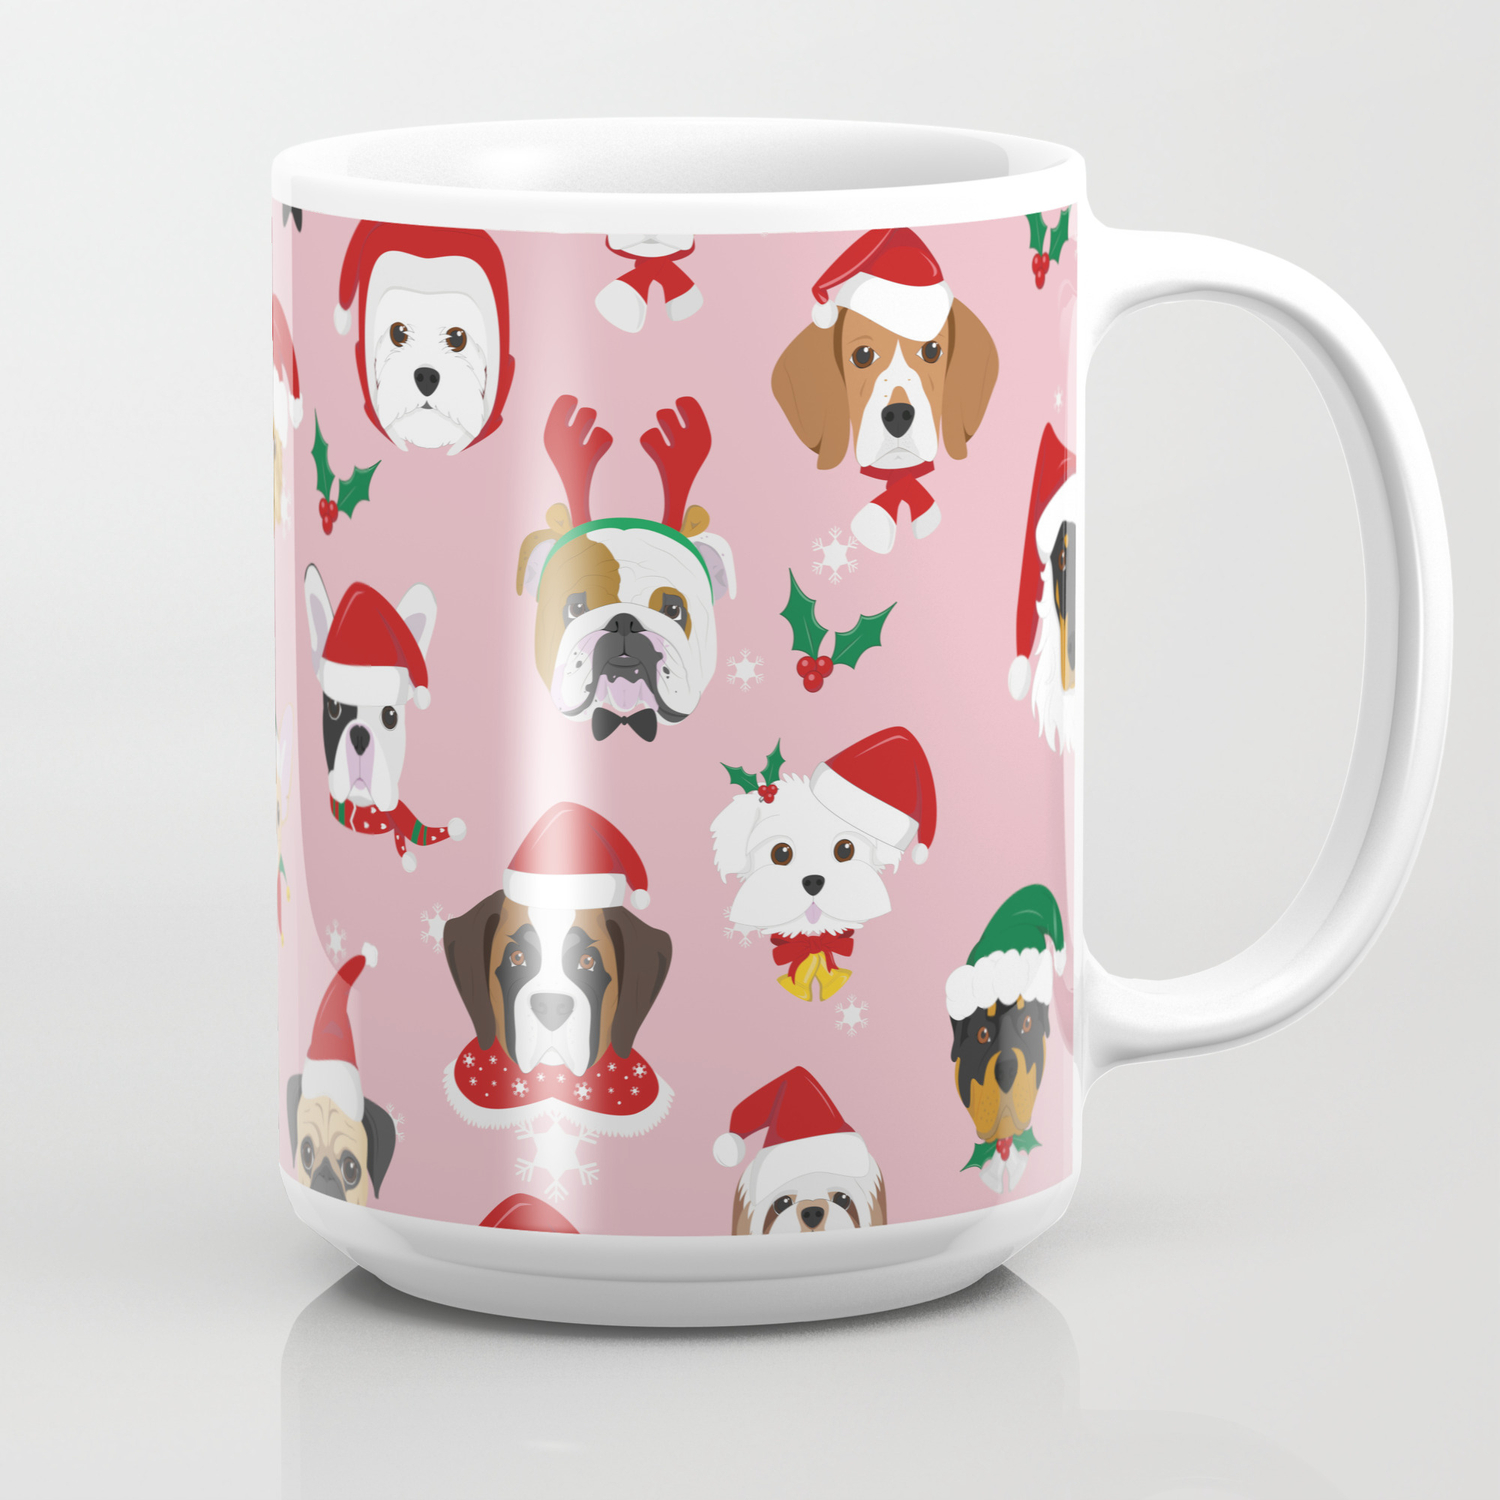 Details about   2 NORTHPOLE CHRISTMAS COFFEE MUGS DOG PAWS AND PICS 